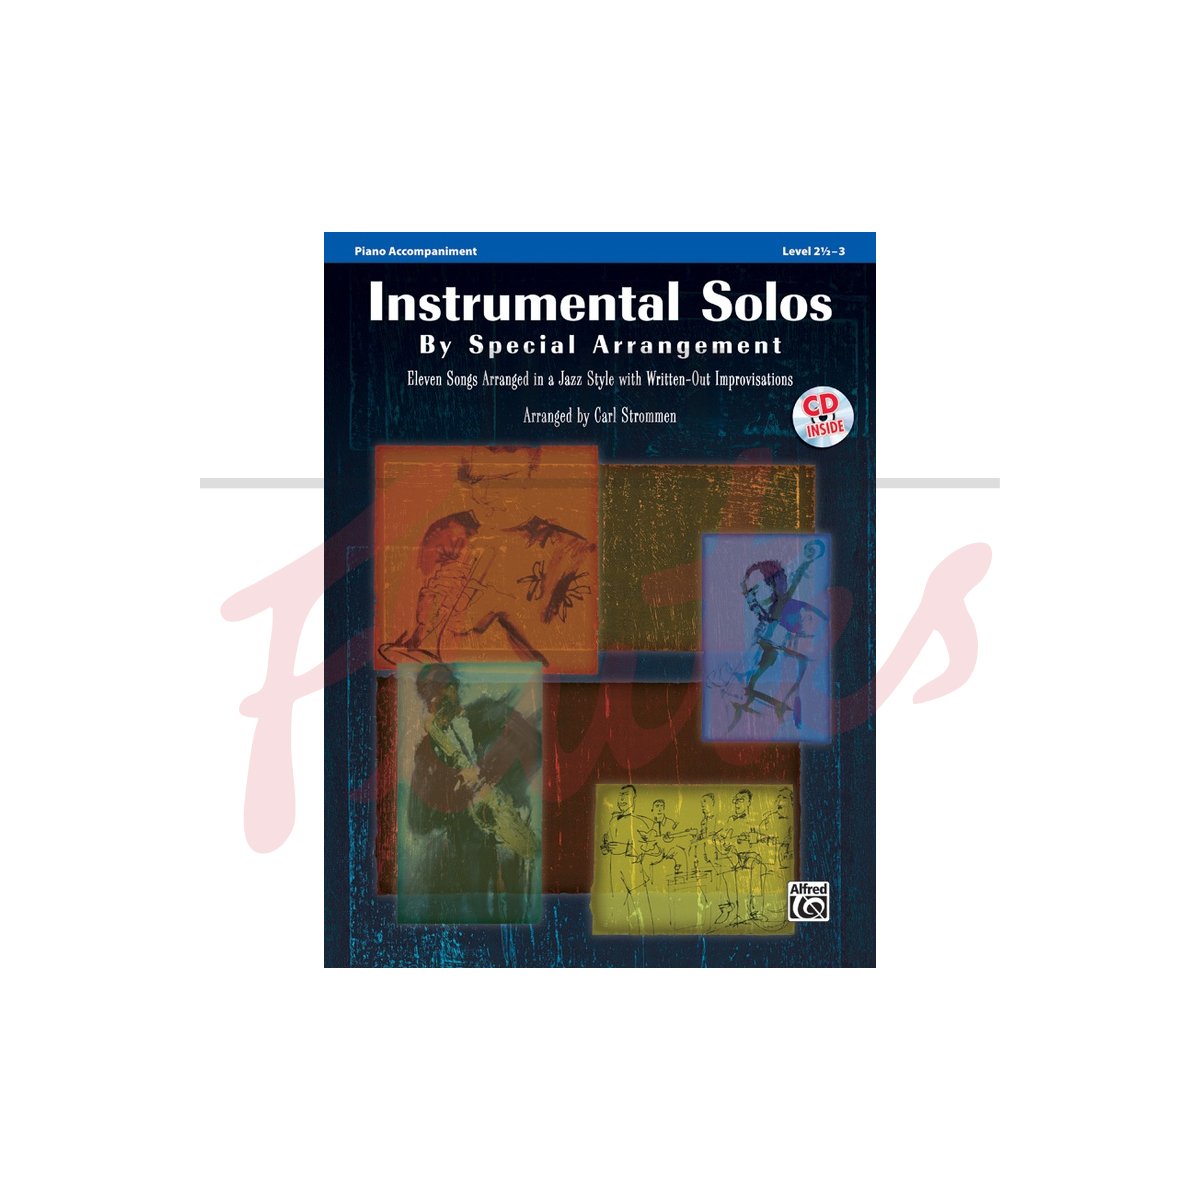 Instrumental Solos by Special Arrangement [Piano Accompaniment]